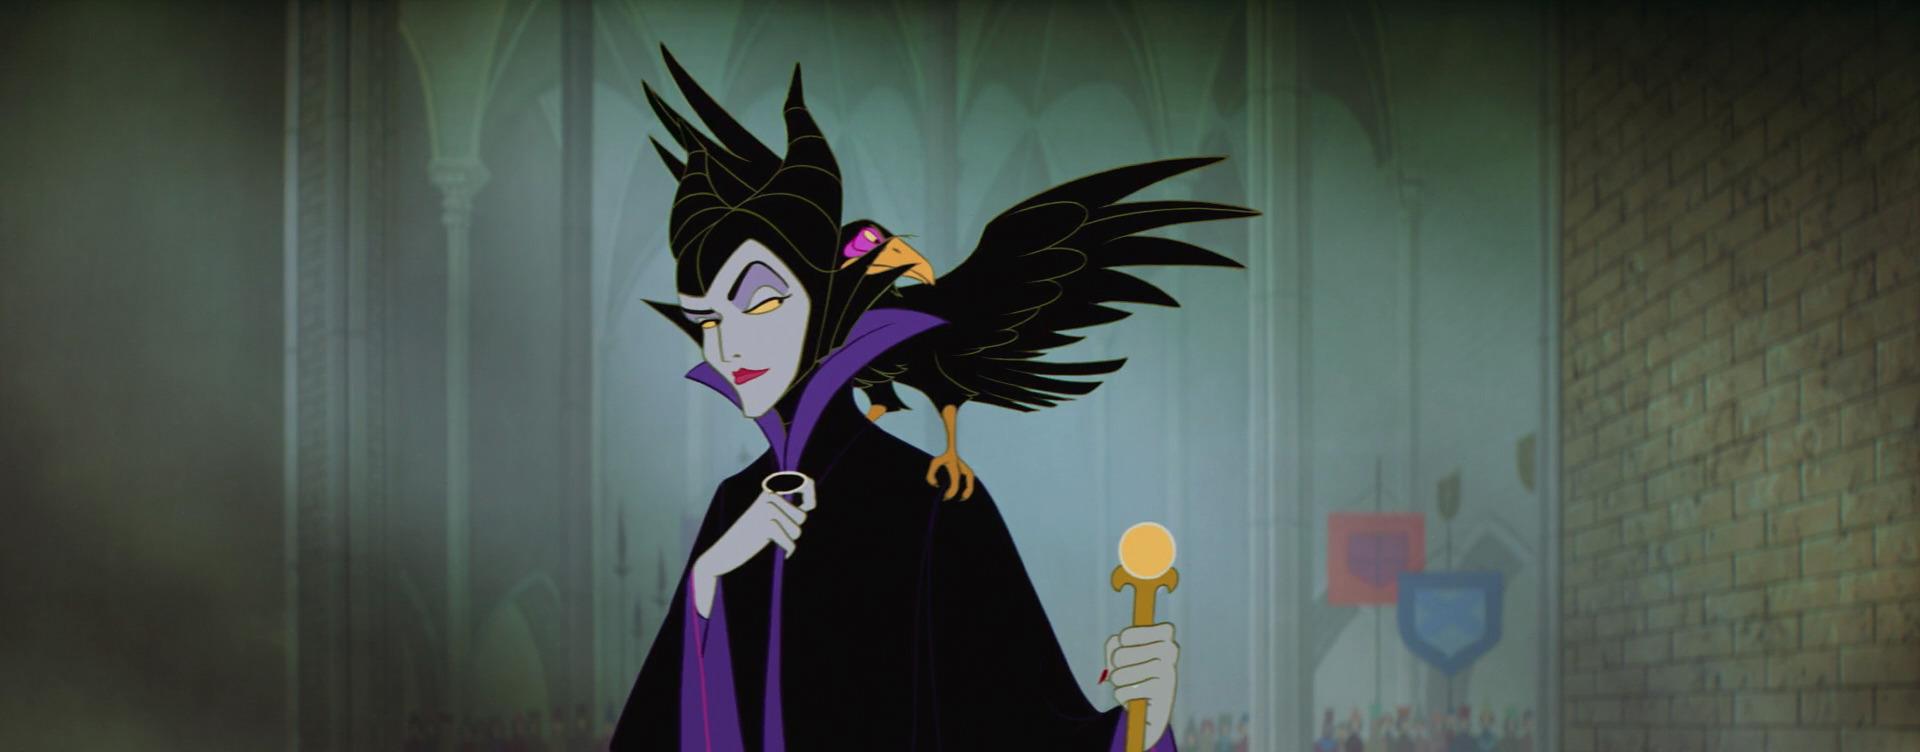 Evil Movie Review: Maleficent. The Brotherhood of Evil Geeks